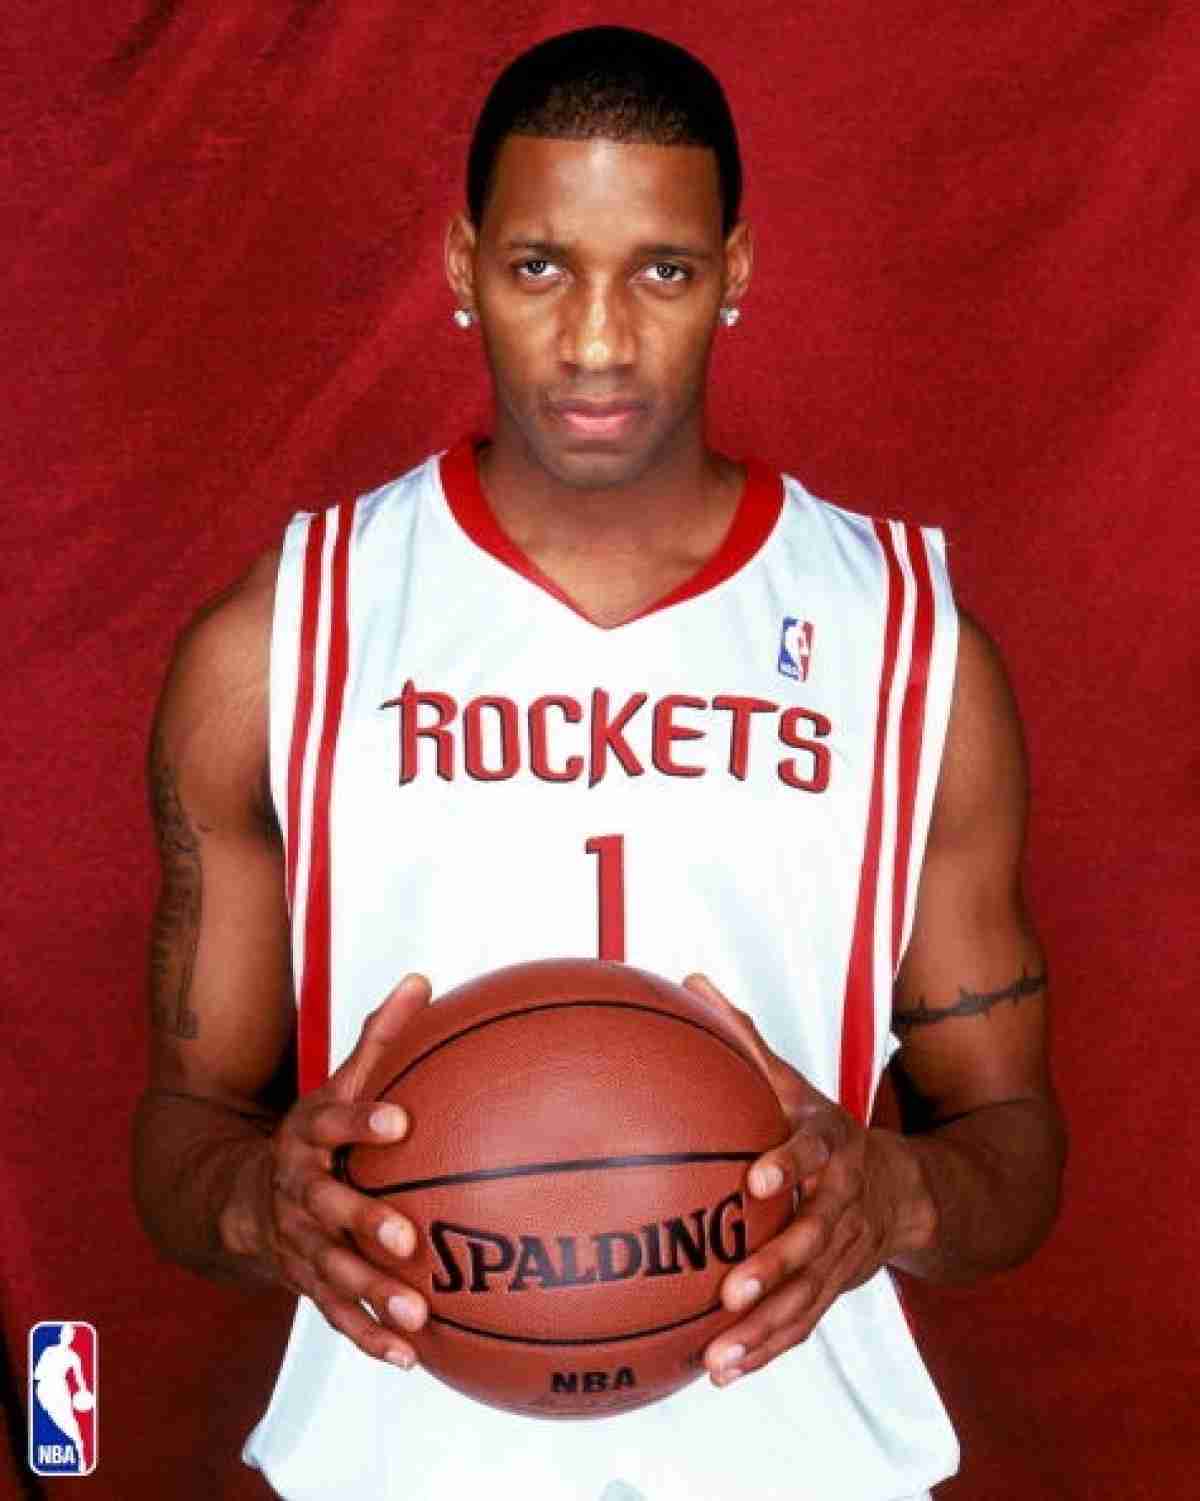 Not in Hall of Fame - Tracy McGrady headlines the 2017 Basketball HOF Class